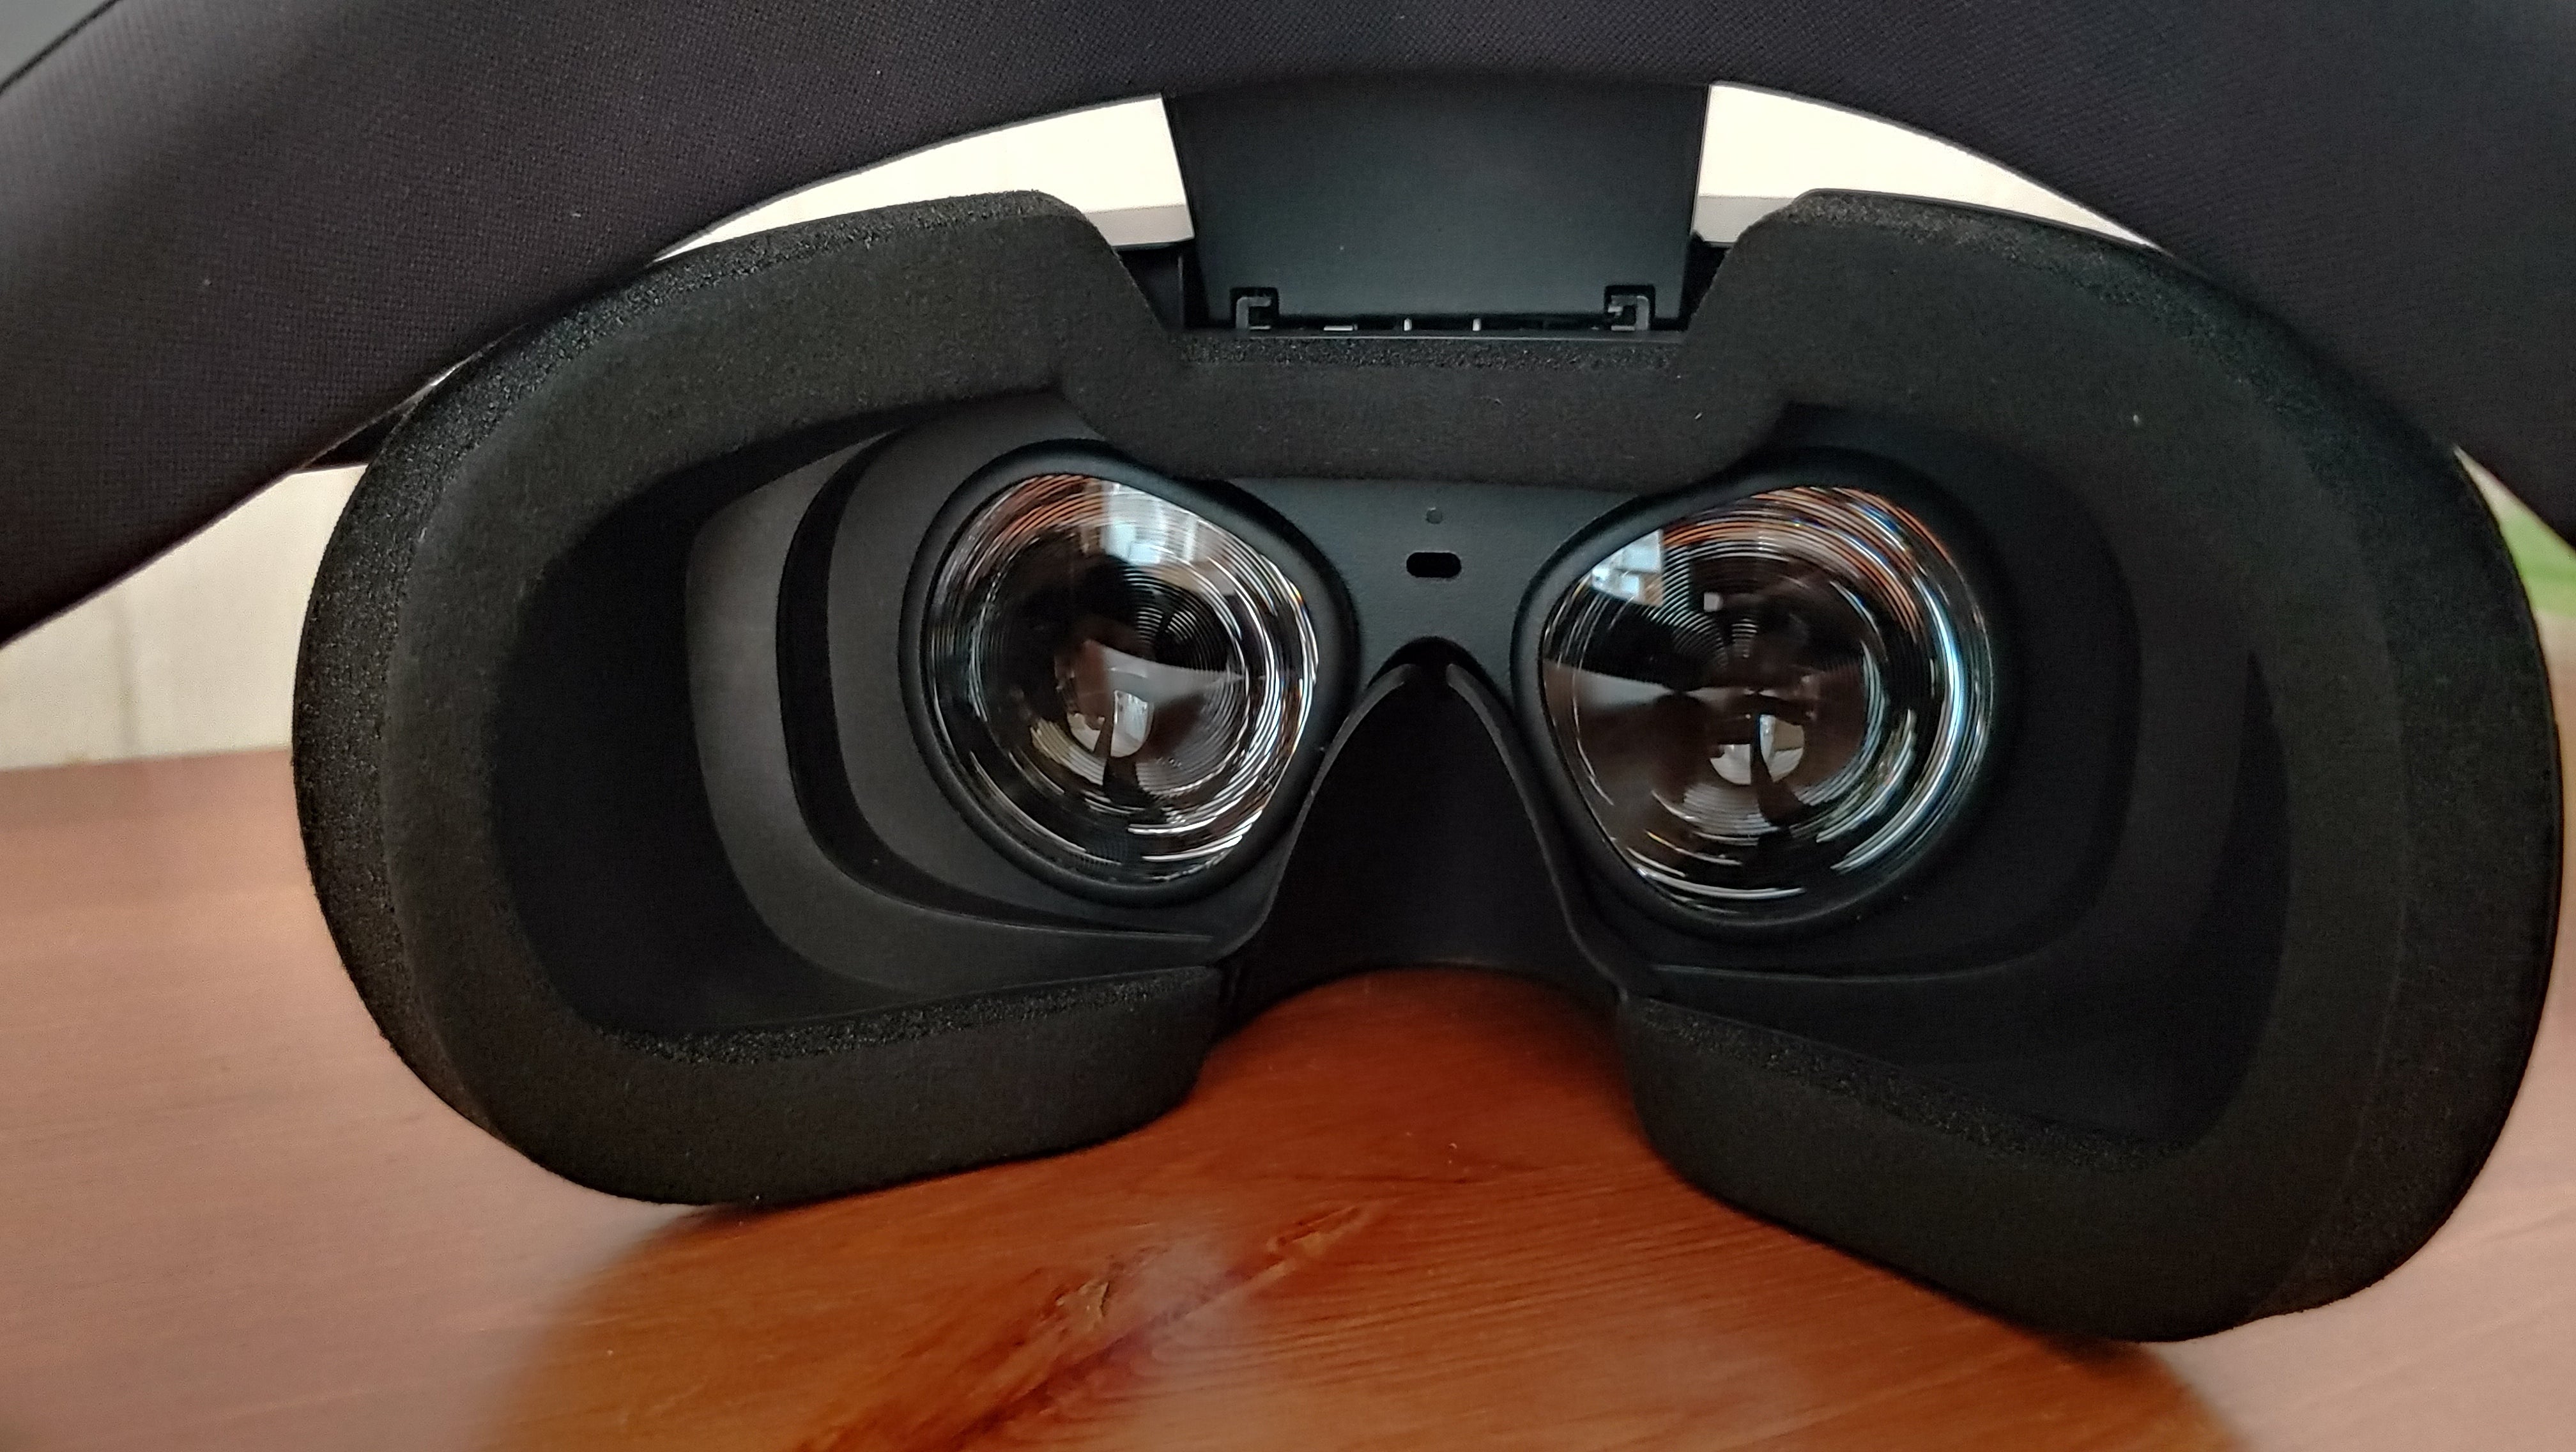 Oculus Rift S review: The second generation of PC-based virtual reality